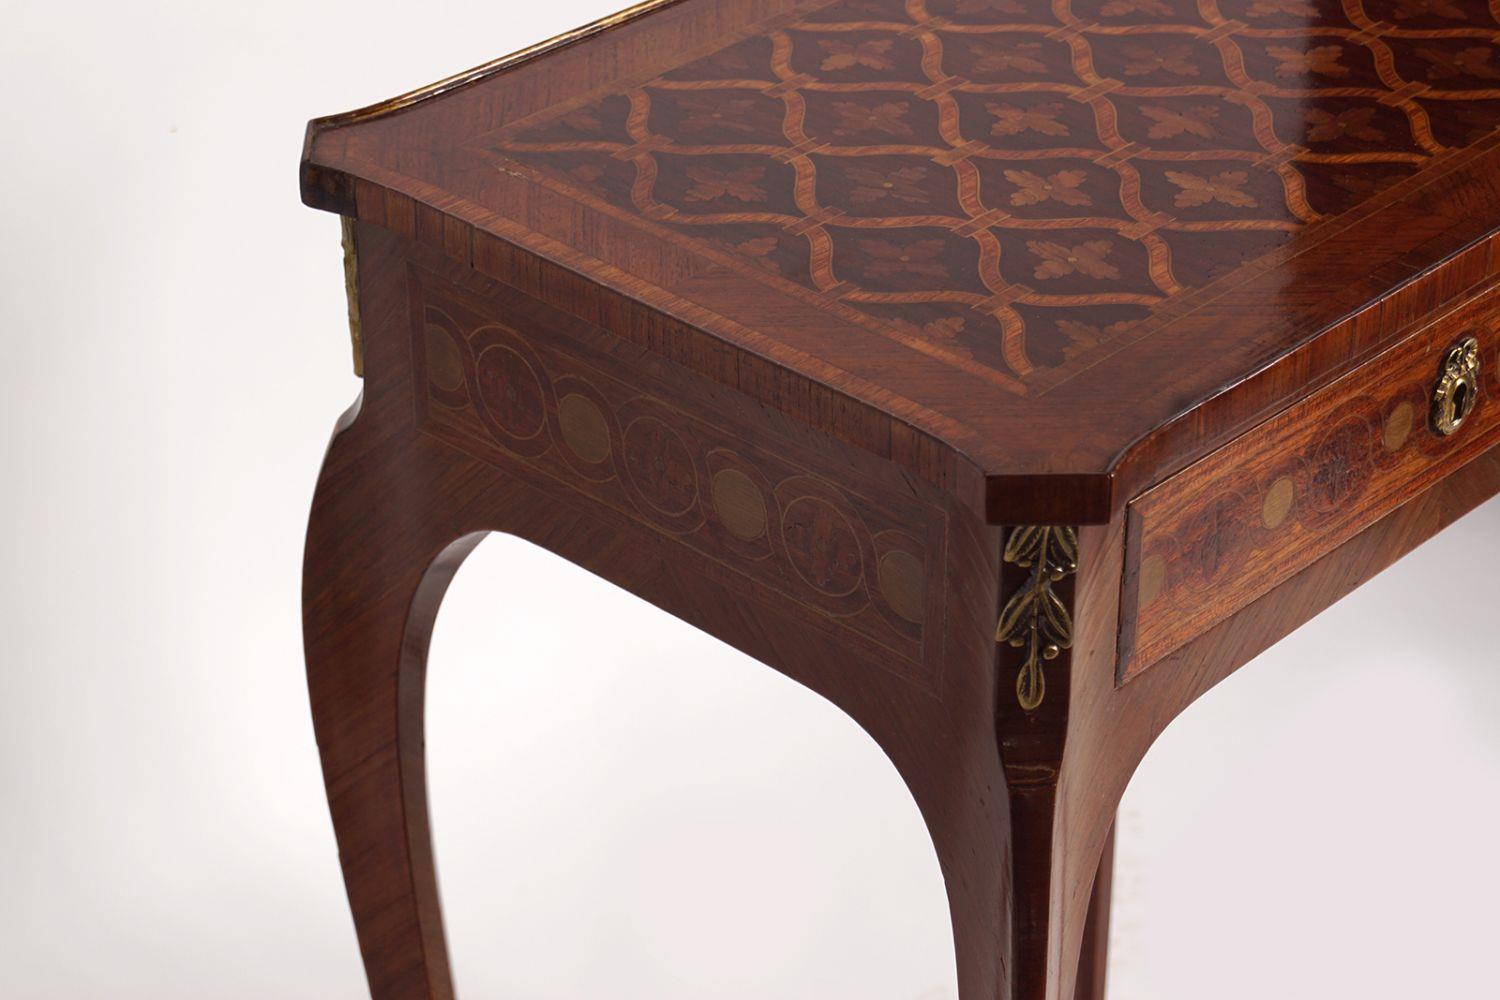 19TH-CENTURY FRENCH PARQUETRY OCCASIONAL TABLE - Image 3 of 3